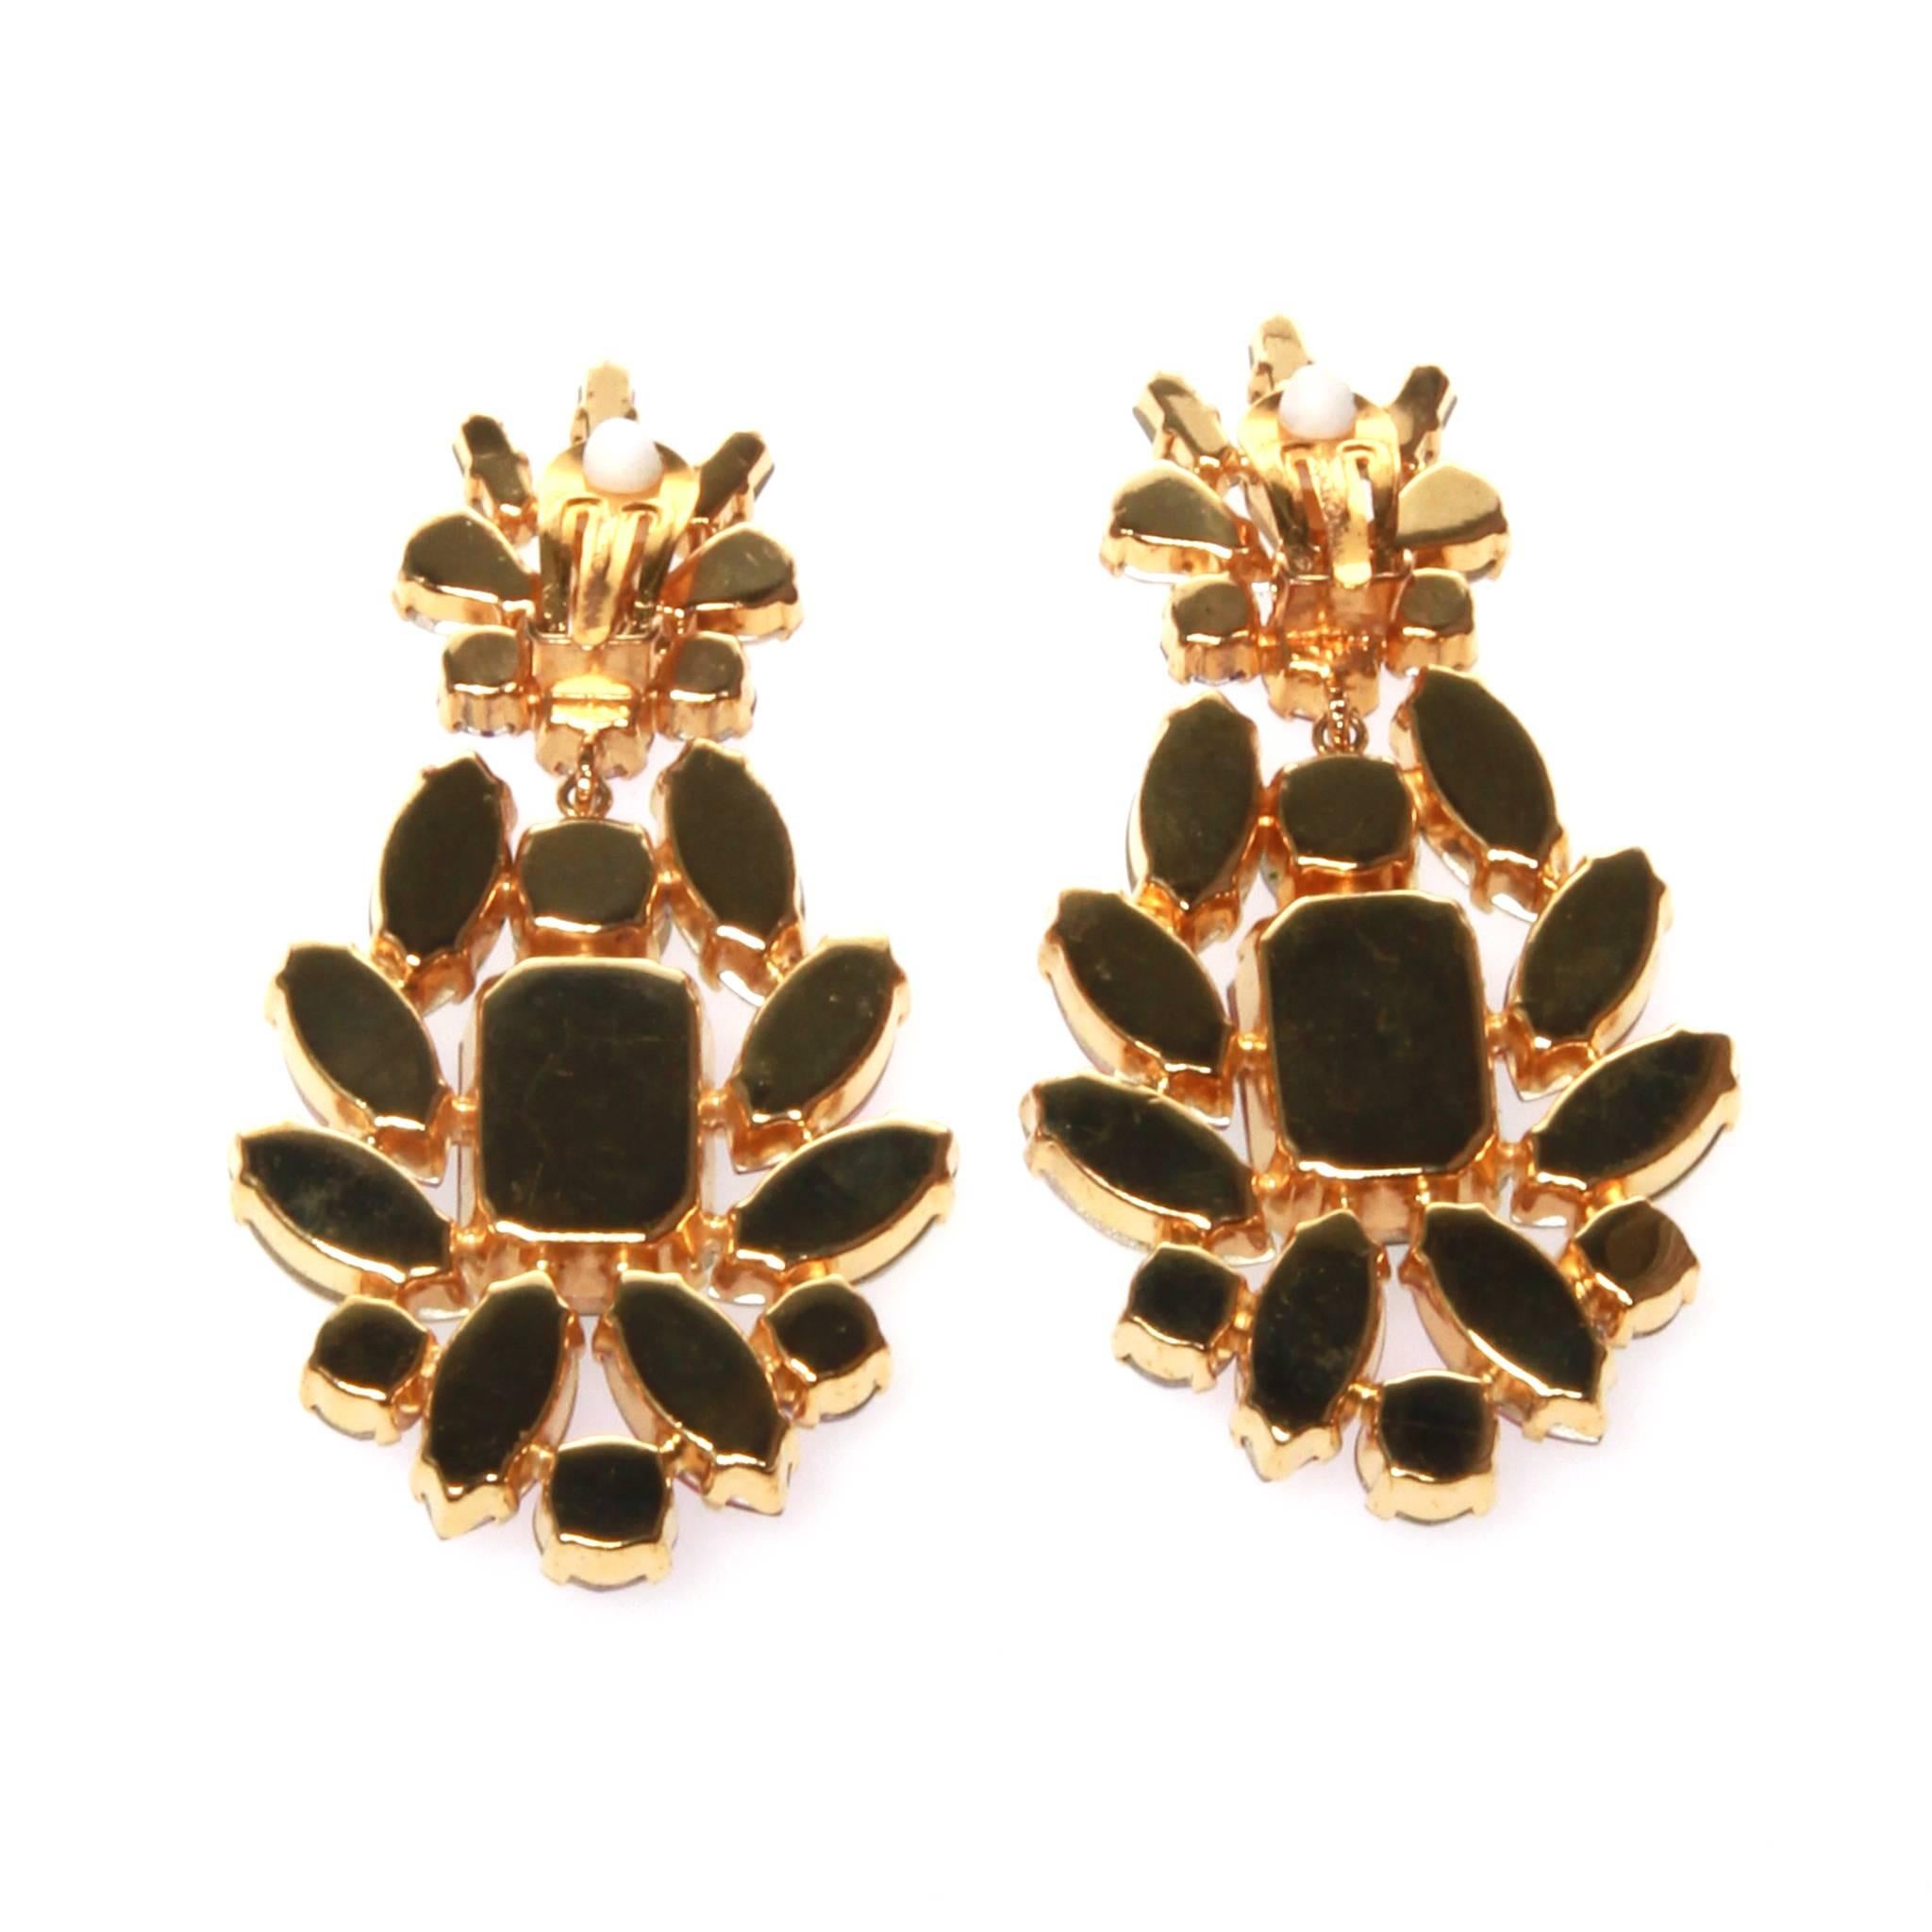 Dolce and Gabbana clip on earrings featuring a cluster of multi-coloured cut glass stones. Set in matte gold-tone metal. 
Comes with authentic and original box.